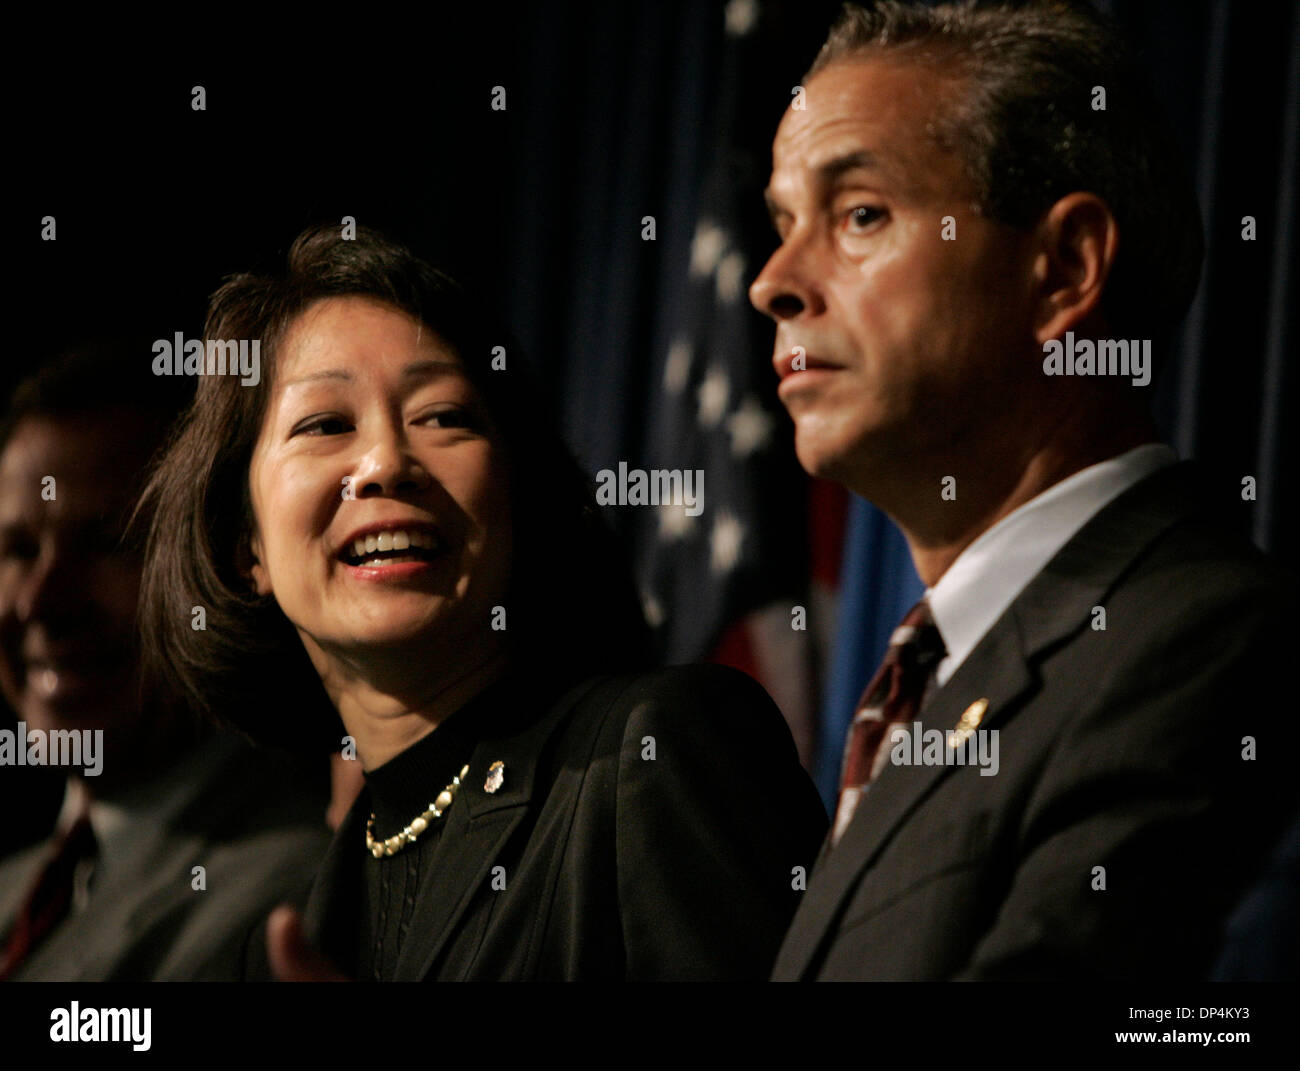 Aug 17, 2006; San Diego, CA, USA; US Attorney CAROL LAM, left, and  JOHN FERNANDES, Special Agent in Charge of the San Diego Office of the DEA, right, during a press conference discussing the arrest on Monday August 14, 2006 in international waters off Baja California of  Francisco Javier Arellano Felix, the kingpin of the Arellano-Felix drug cartel. Arrested along with Arellano Fe Stock Photo